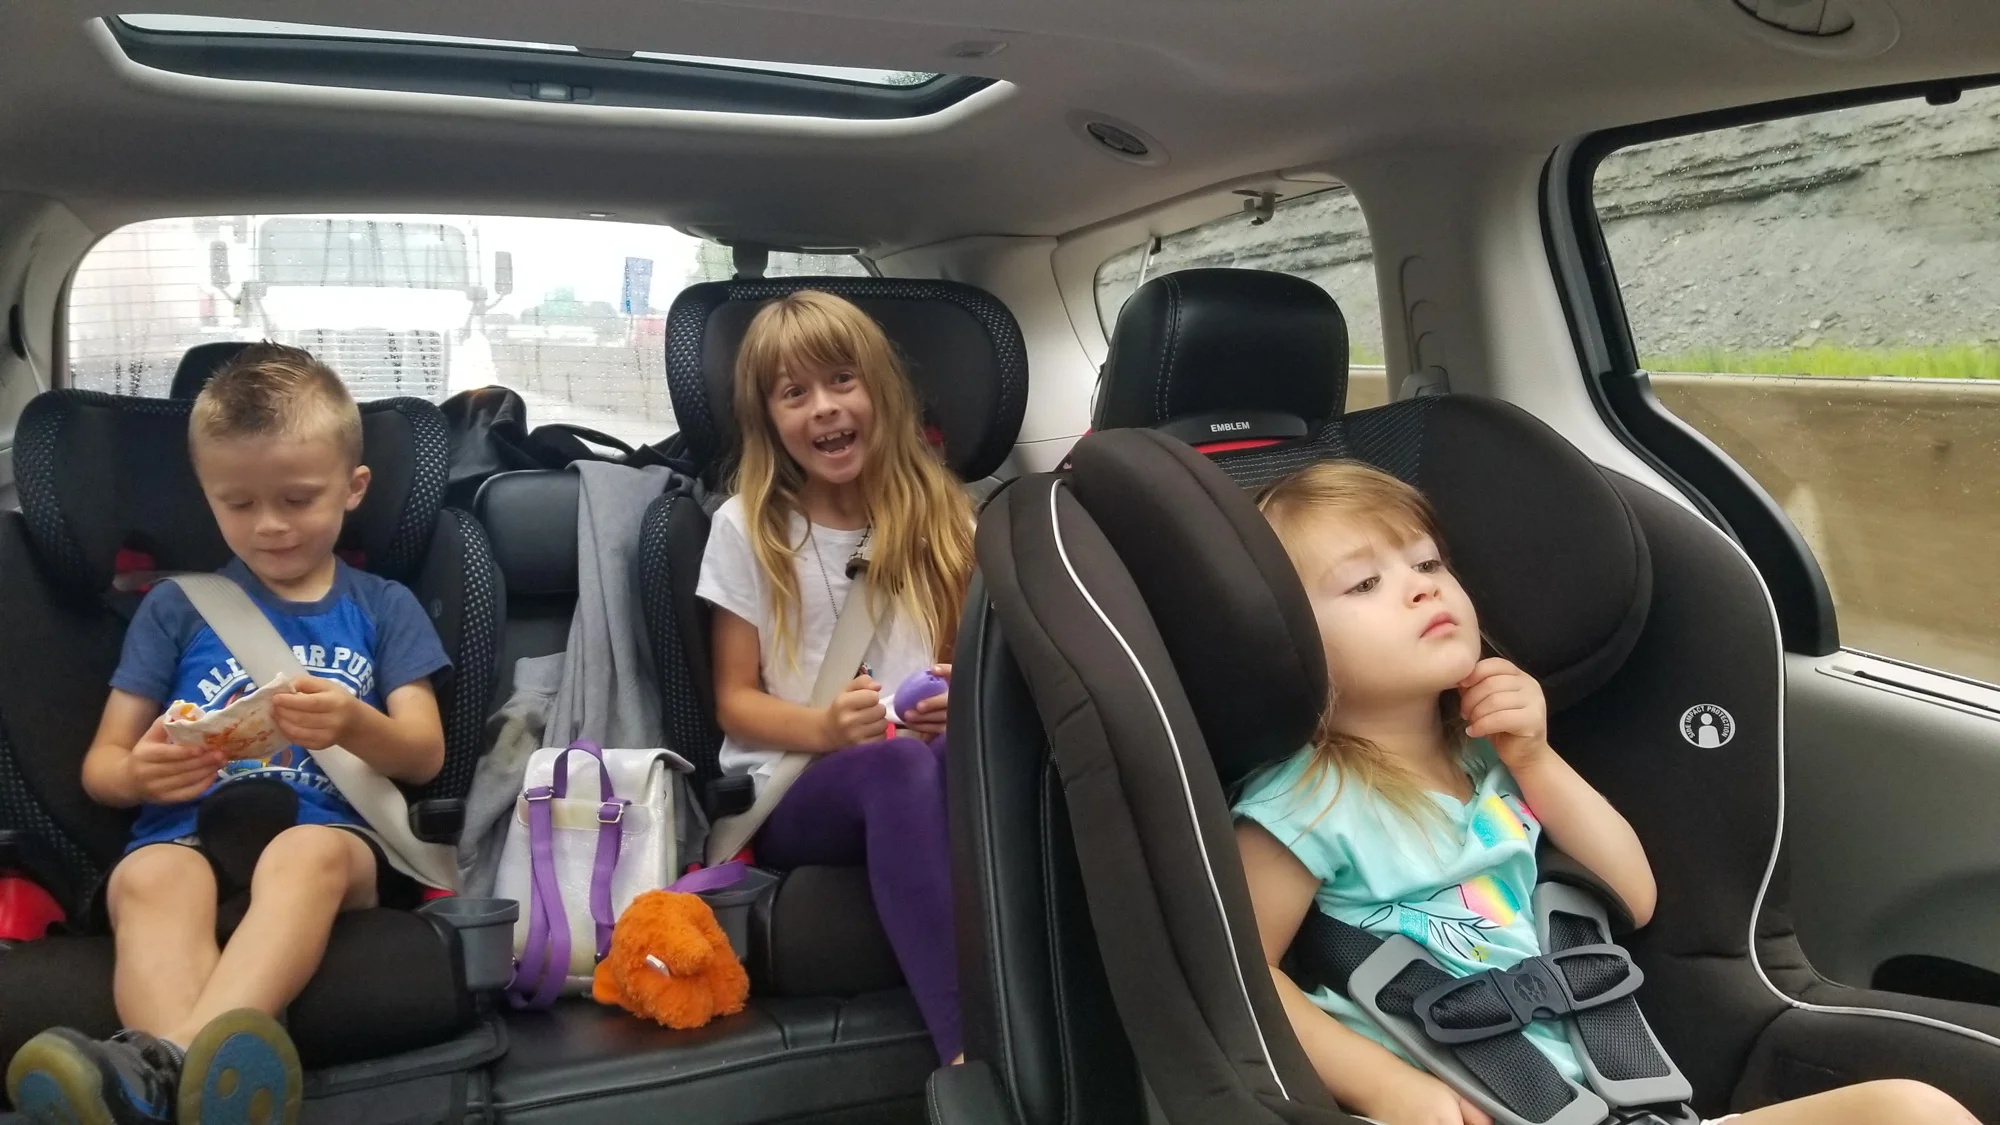 Traveling with kids in a car. Three children inside van carseats.